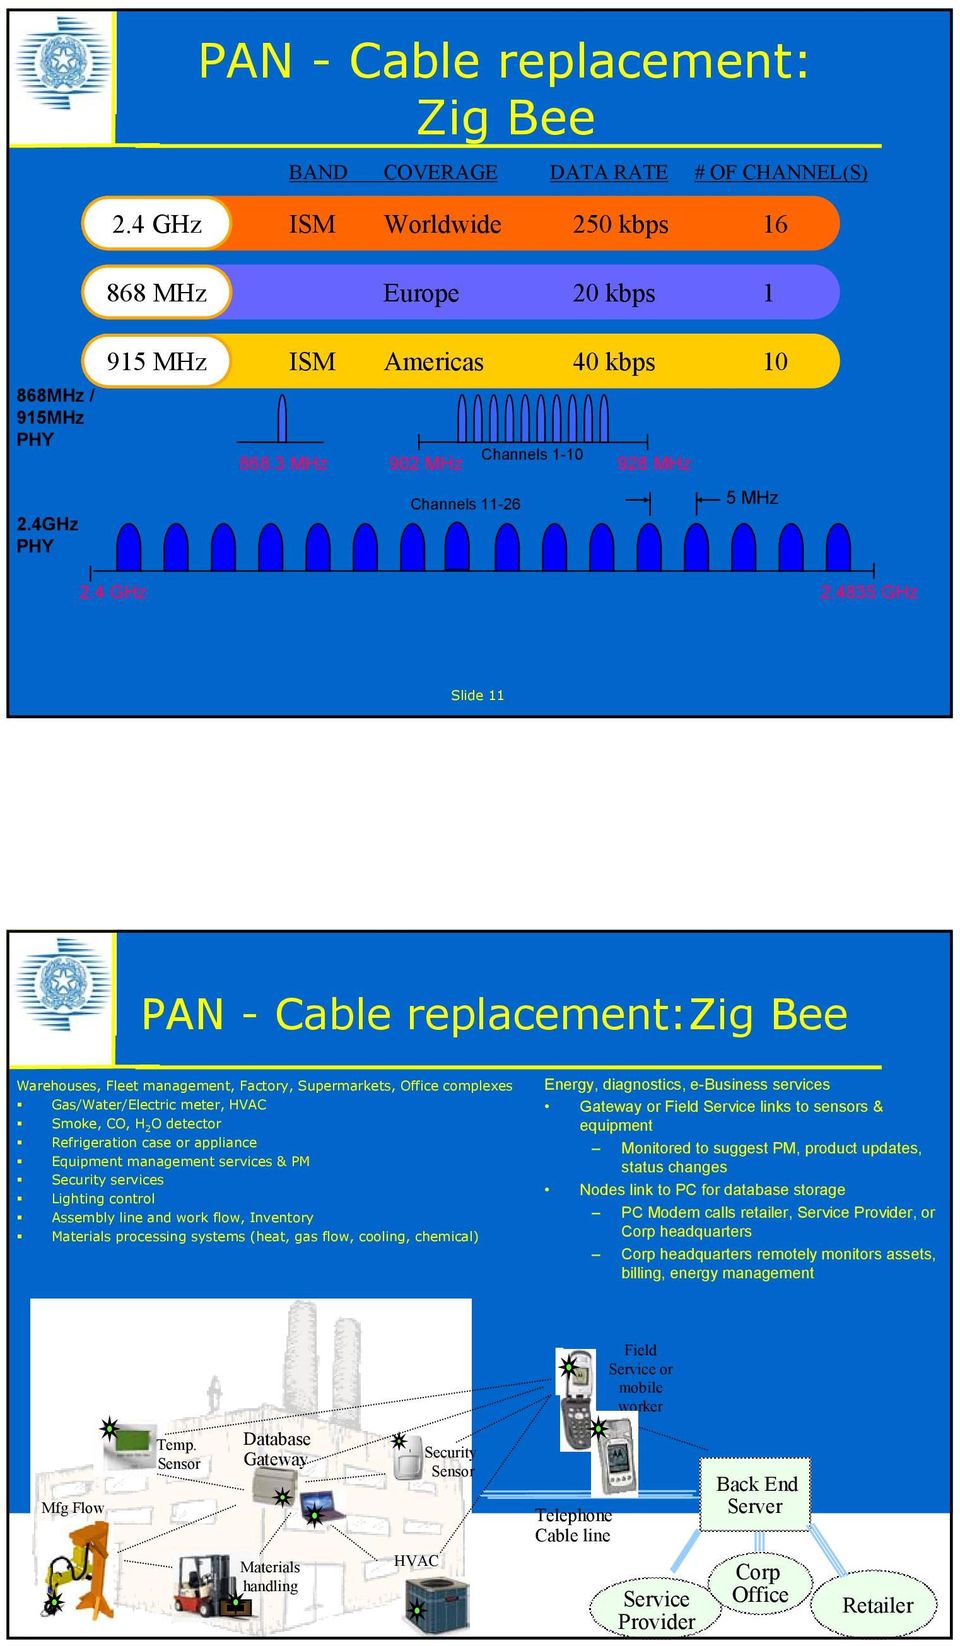 4835 GHz Slide 11 PAN - Cable replacement:zig Bee Warehouses, Fleet management, Factory, Supermarkets, Office complexes Gas/Water/Electric meter, HVAC Smoke, CO, H 2 O detector Refrigeration case or